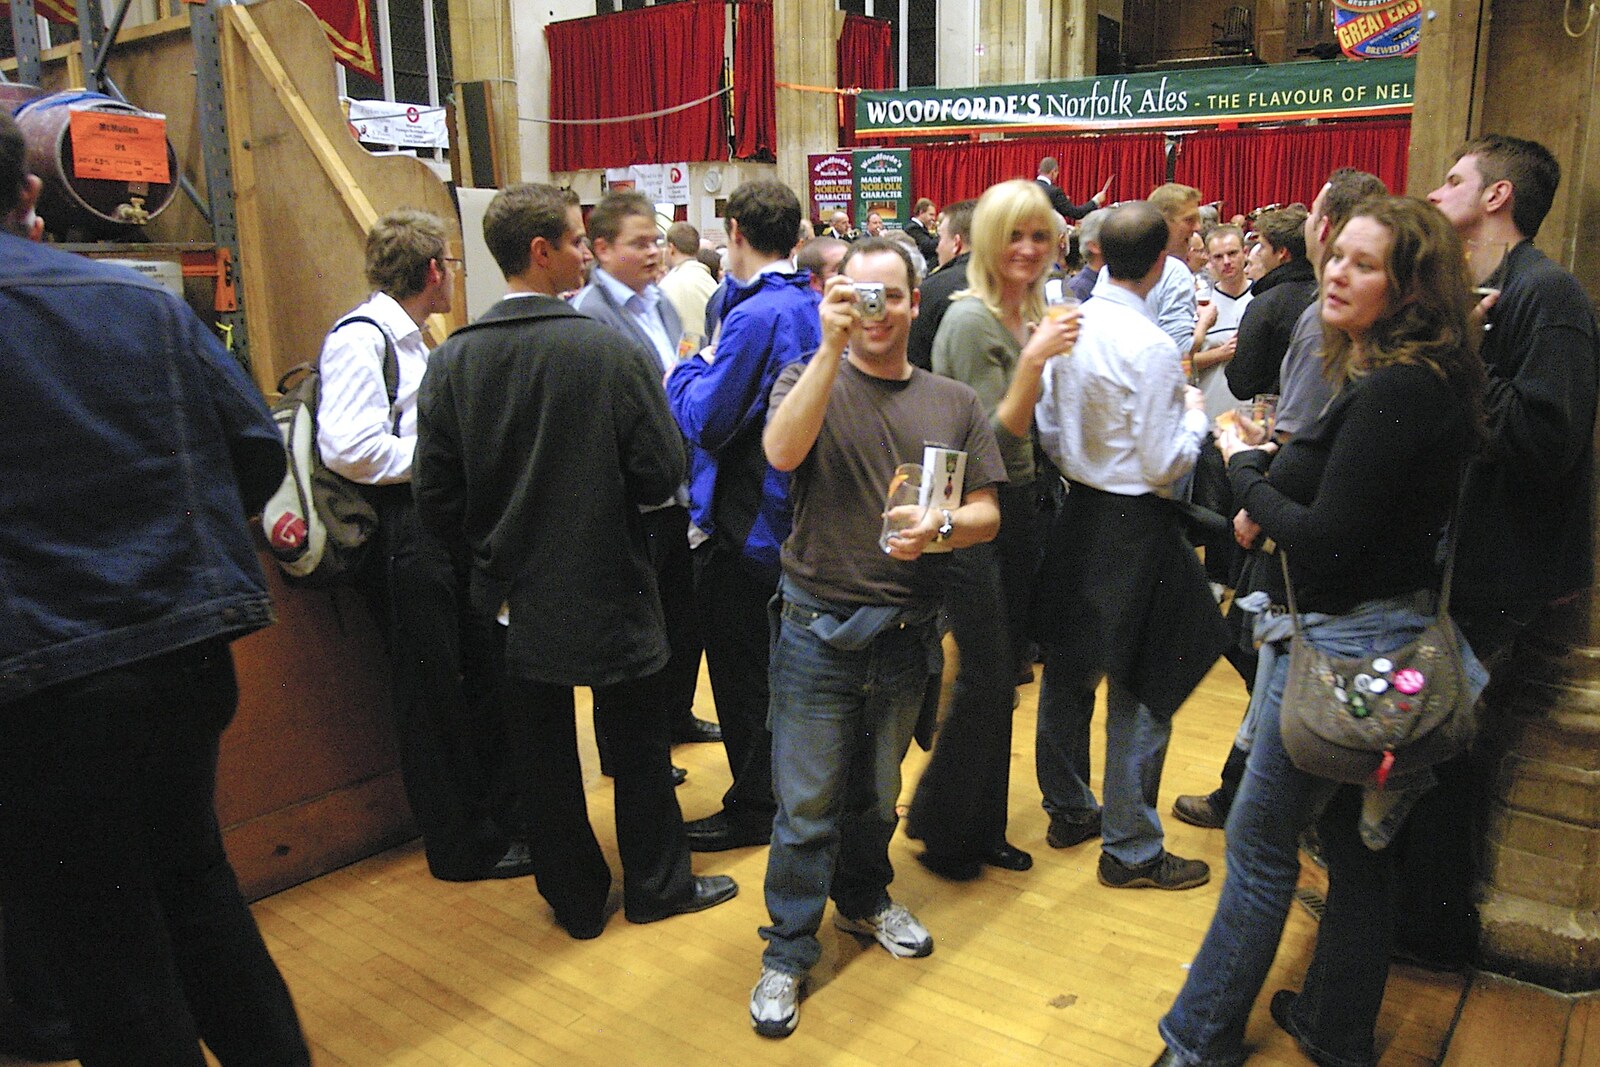 Russell takes a photo from The CAMRA Norwich Beer Festival, St. Andrew's Hall, Norwich - 25th October 2006